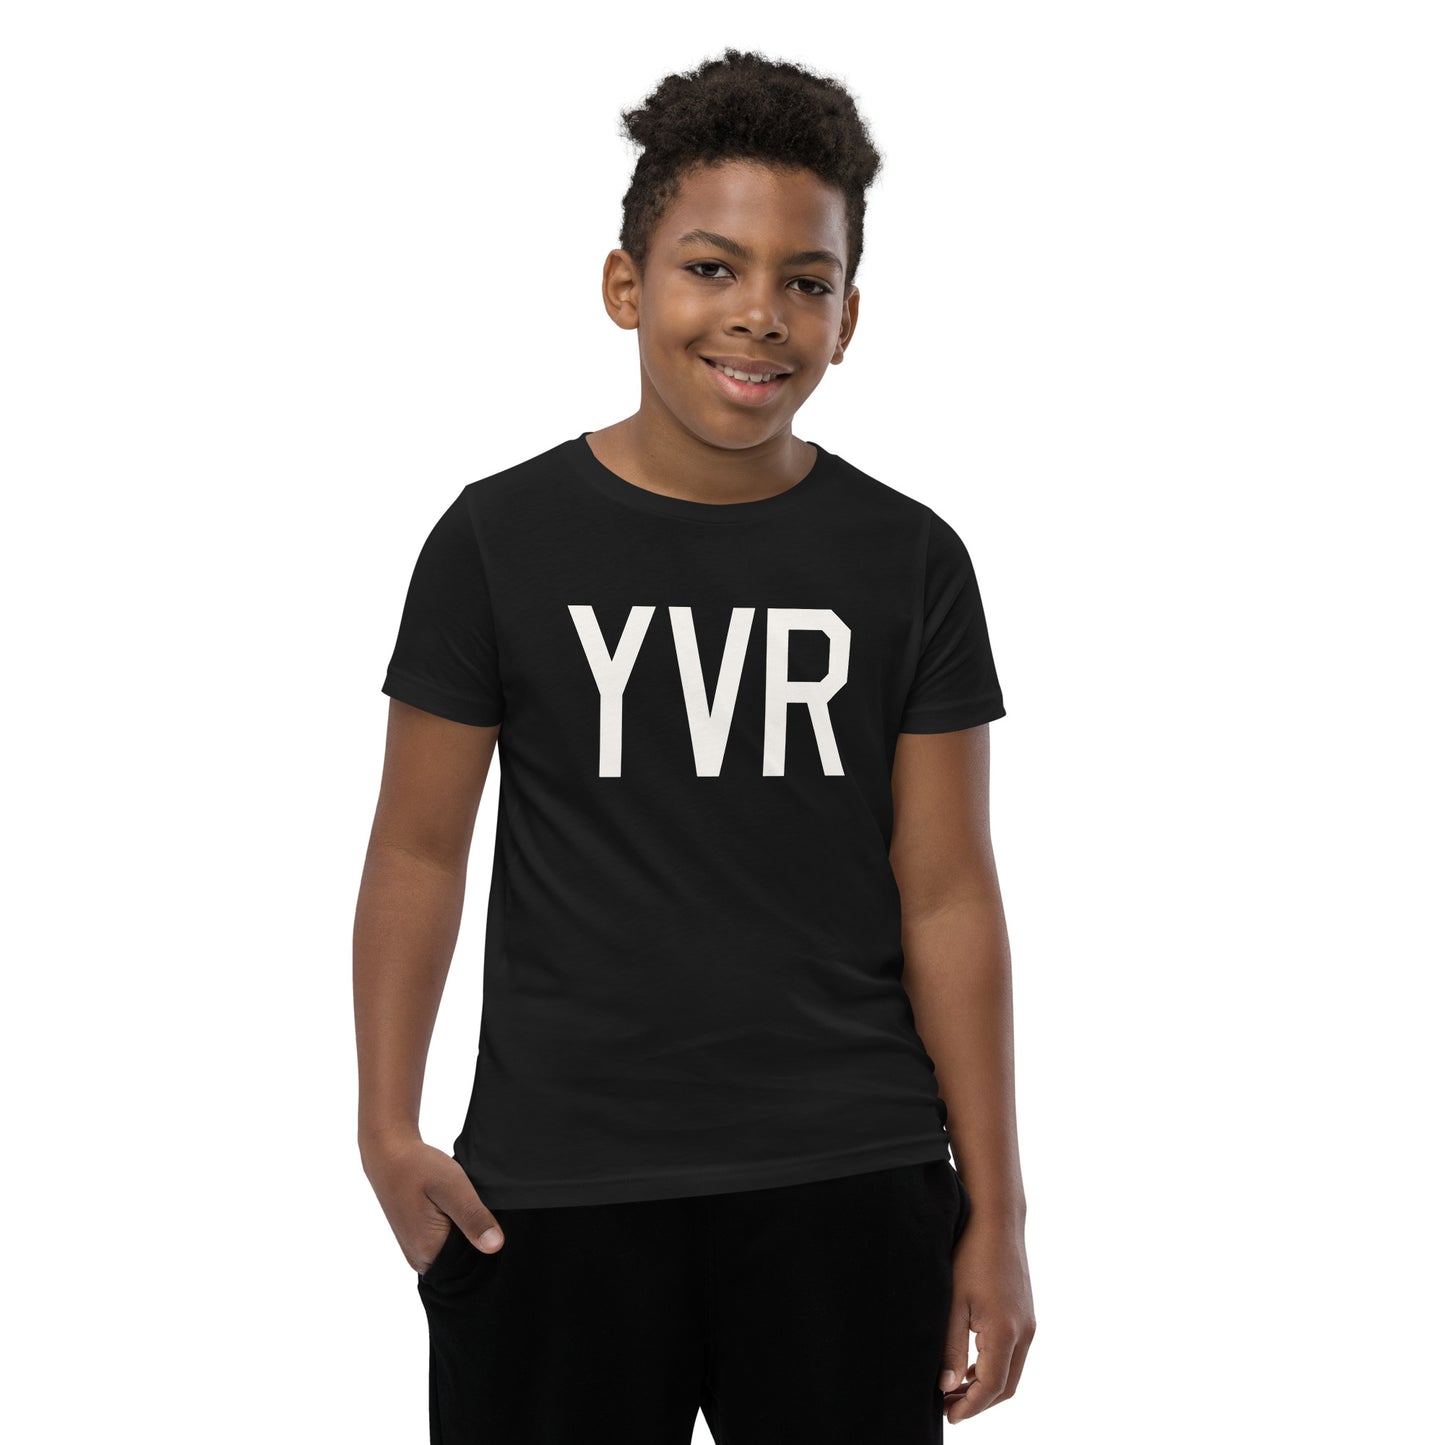 Kid's T-Shirt - White Graphic • YVR Vancouver • YHM Designs - Image 06